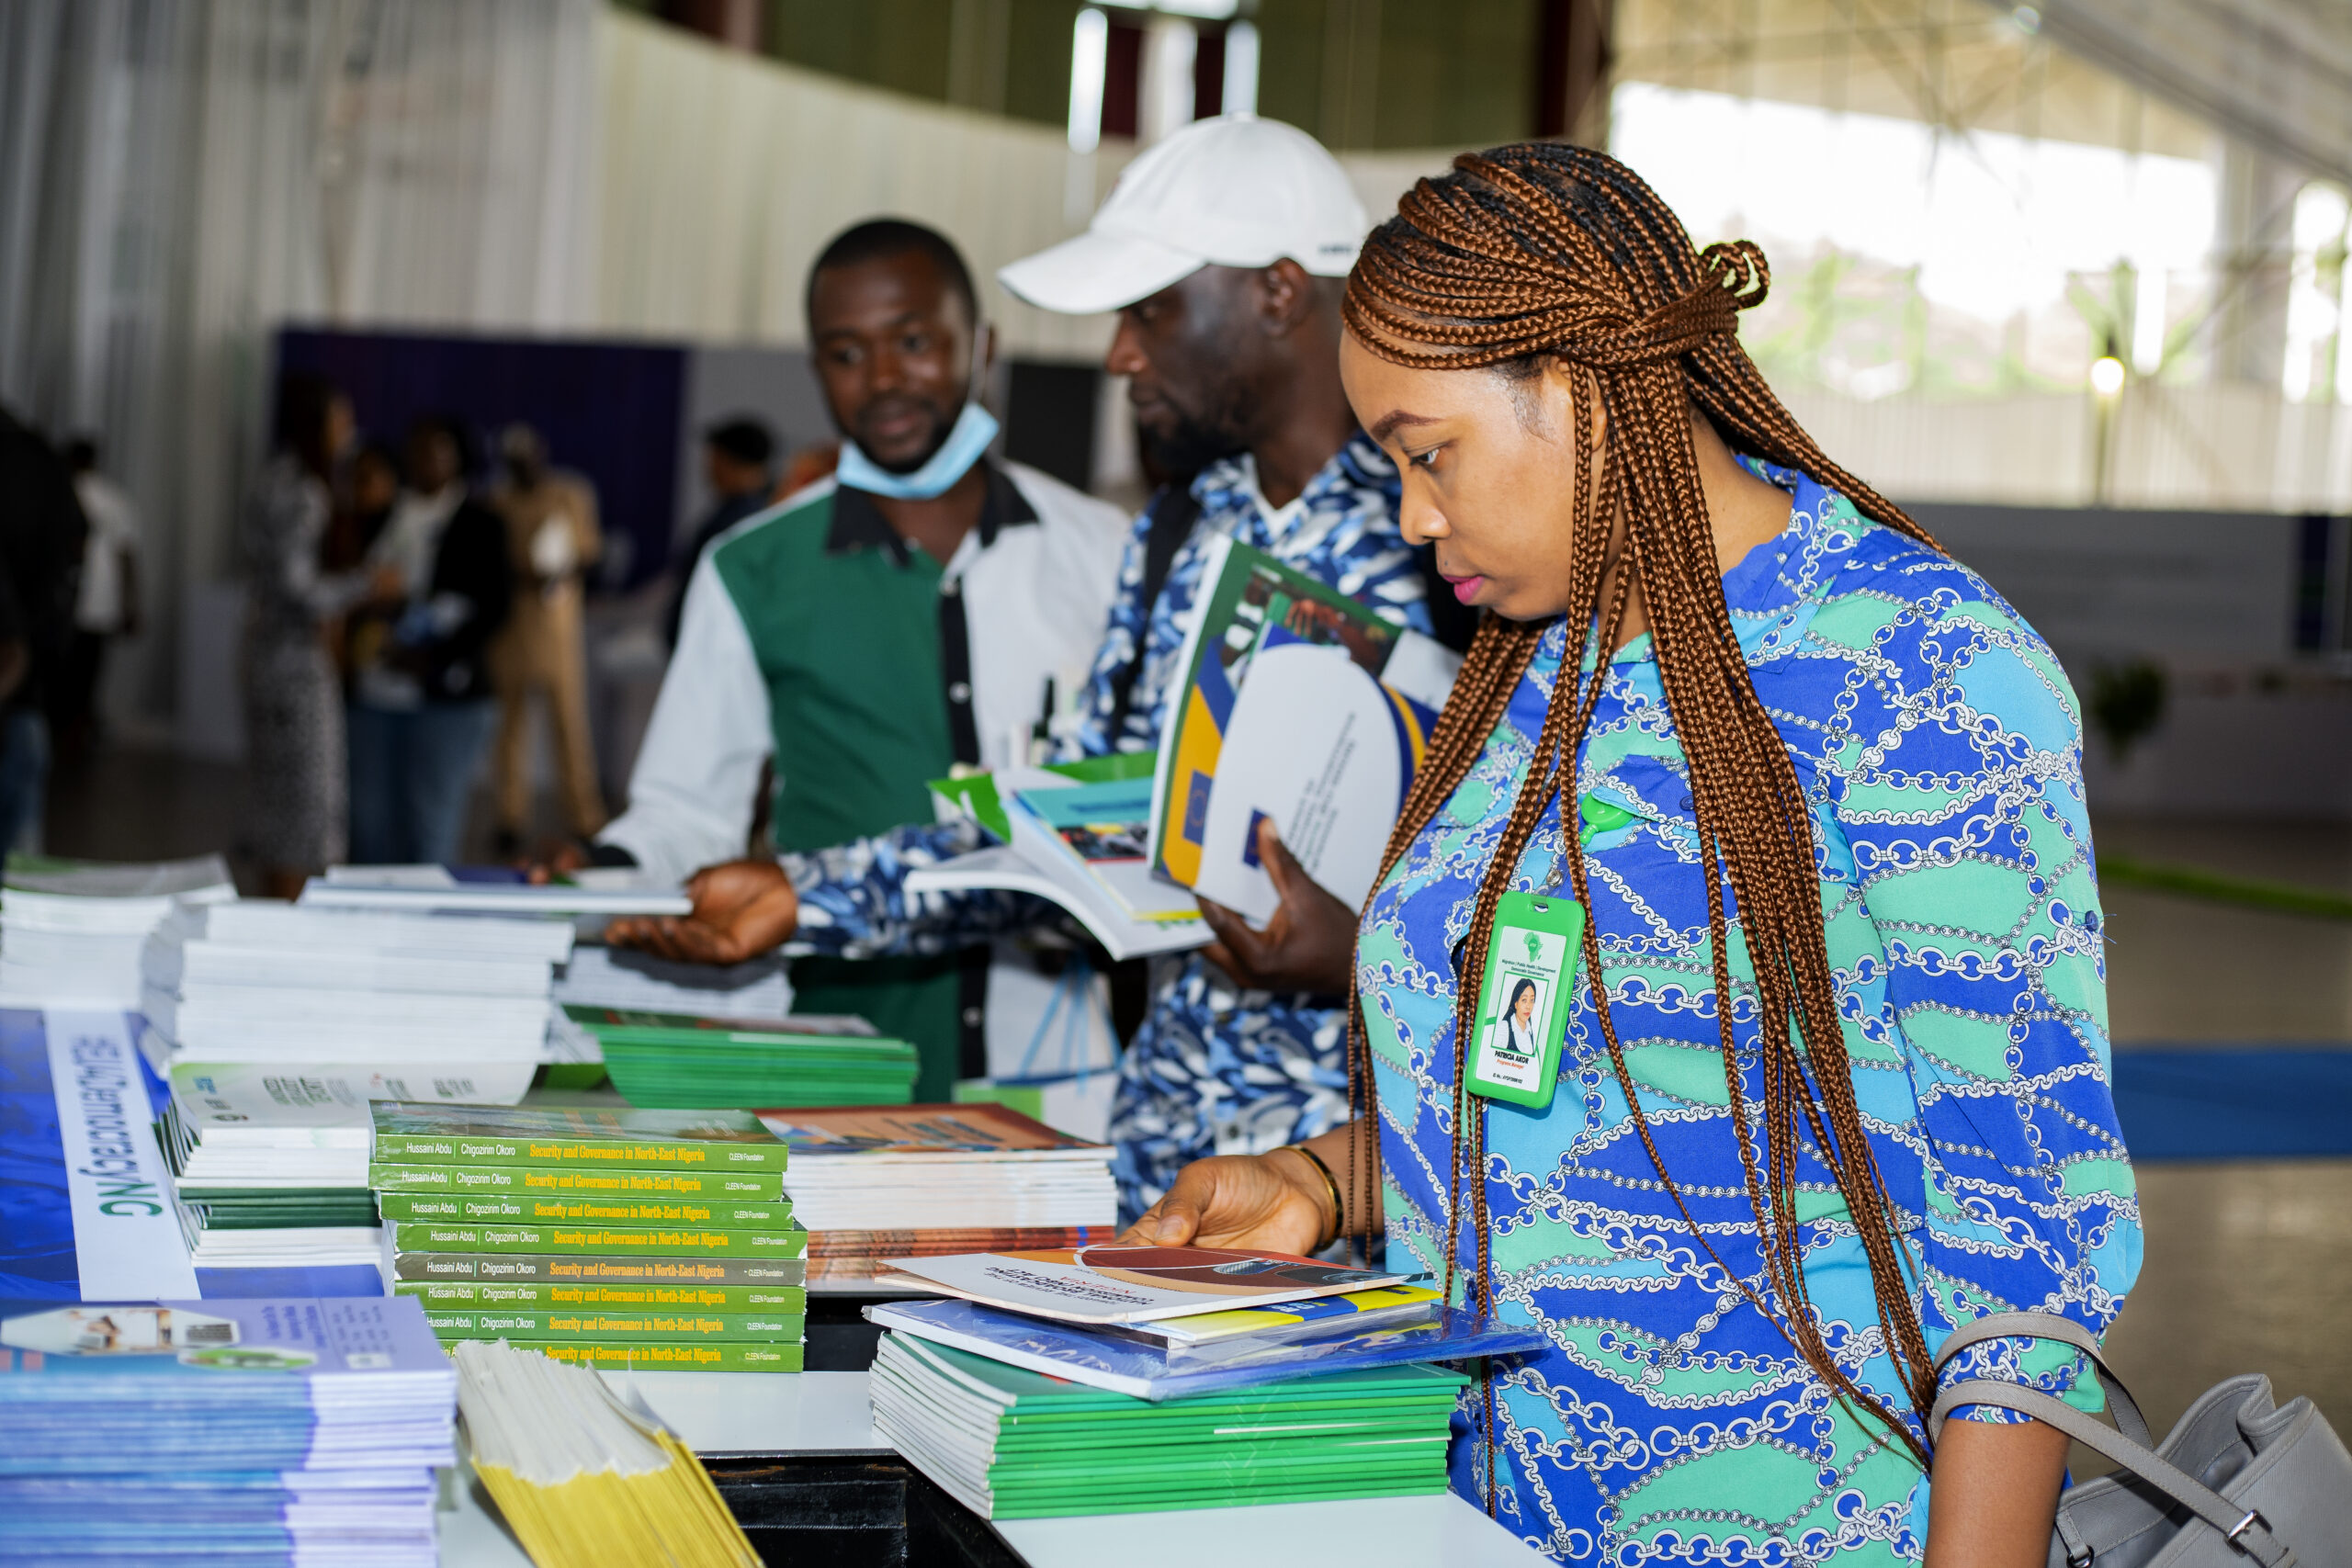 Patricia Akor -Head of Programmes-AYGF selecting free books and reports at the event market place.